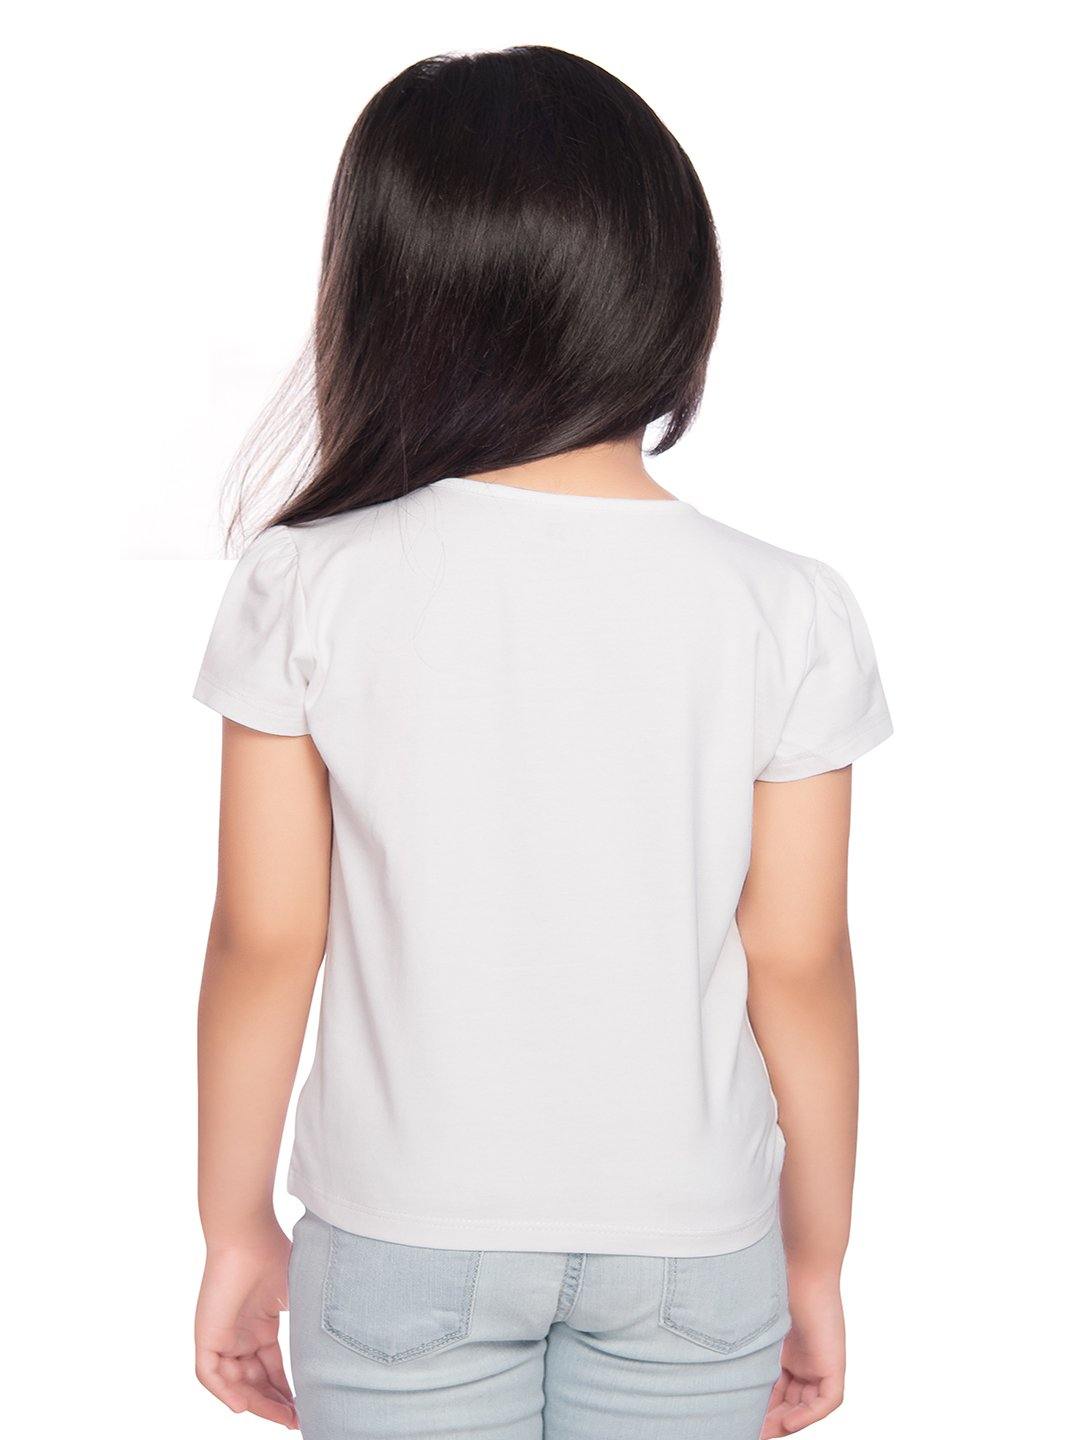 Tiny Baby Black Colored Top - T-109 White - TINY BABY INDIA shop.tinybaby.in